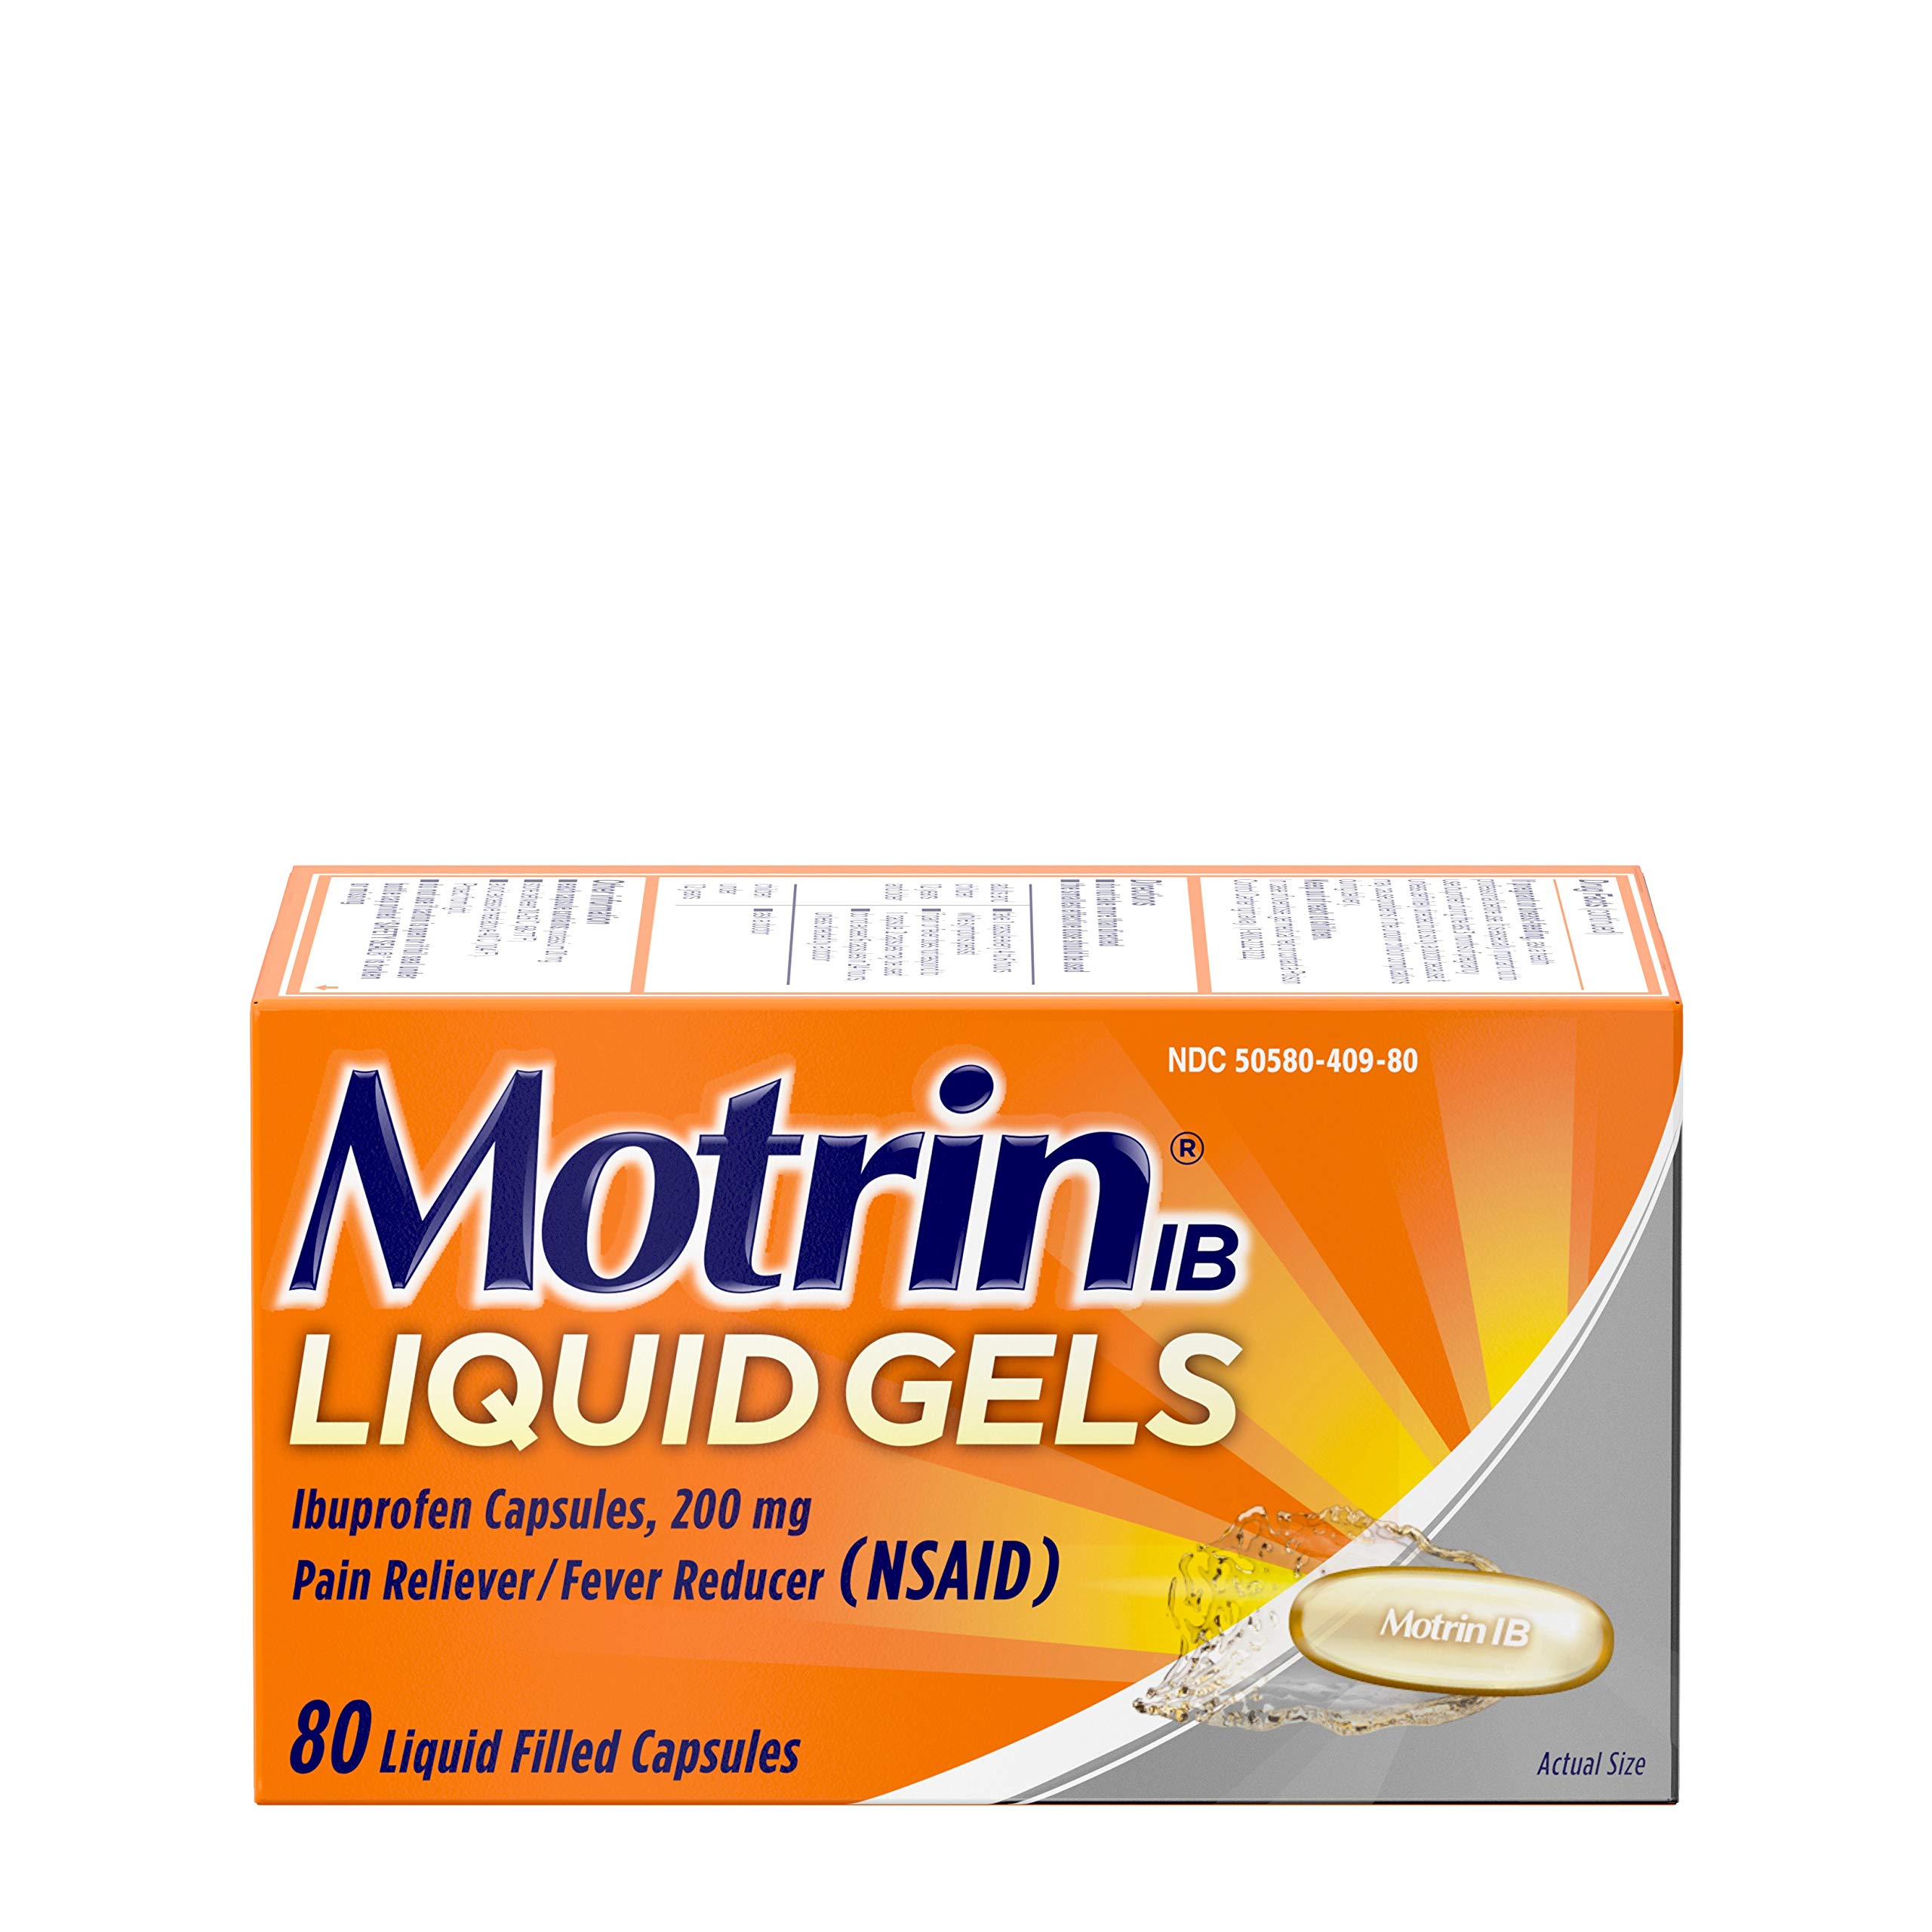 Motrin IB 200mg Ibuprofen Liquid Gel Pain Reliever/Fever Reducer for Aches & Pain, 80 ct